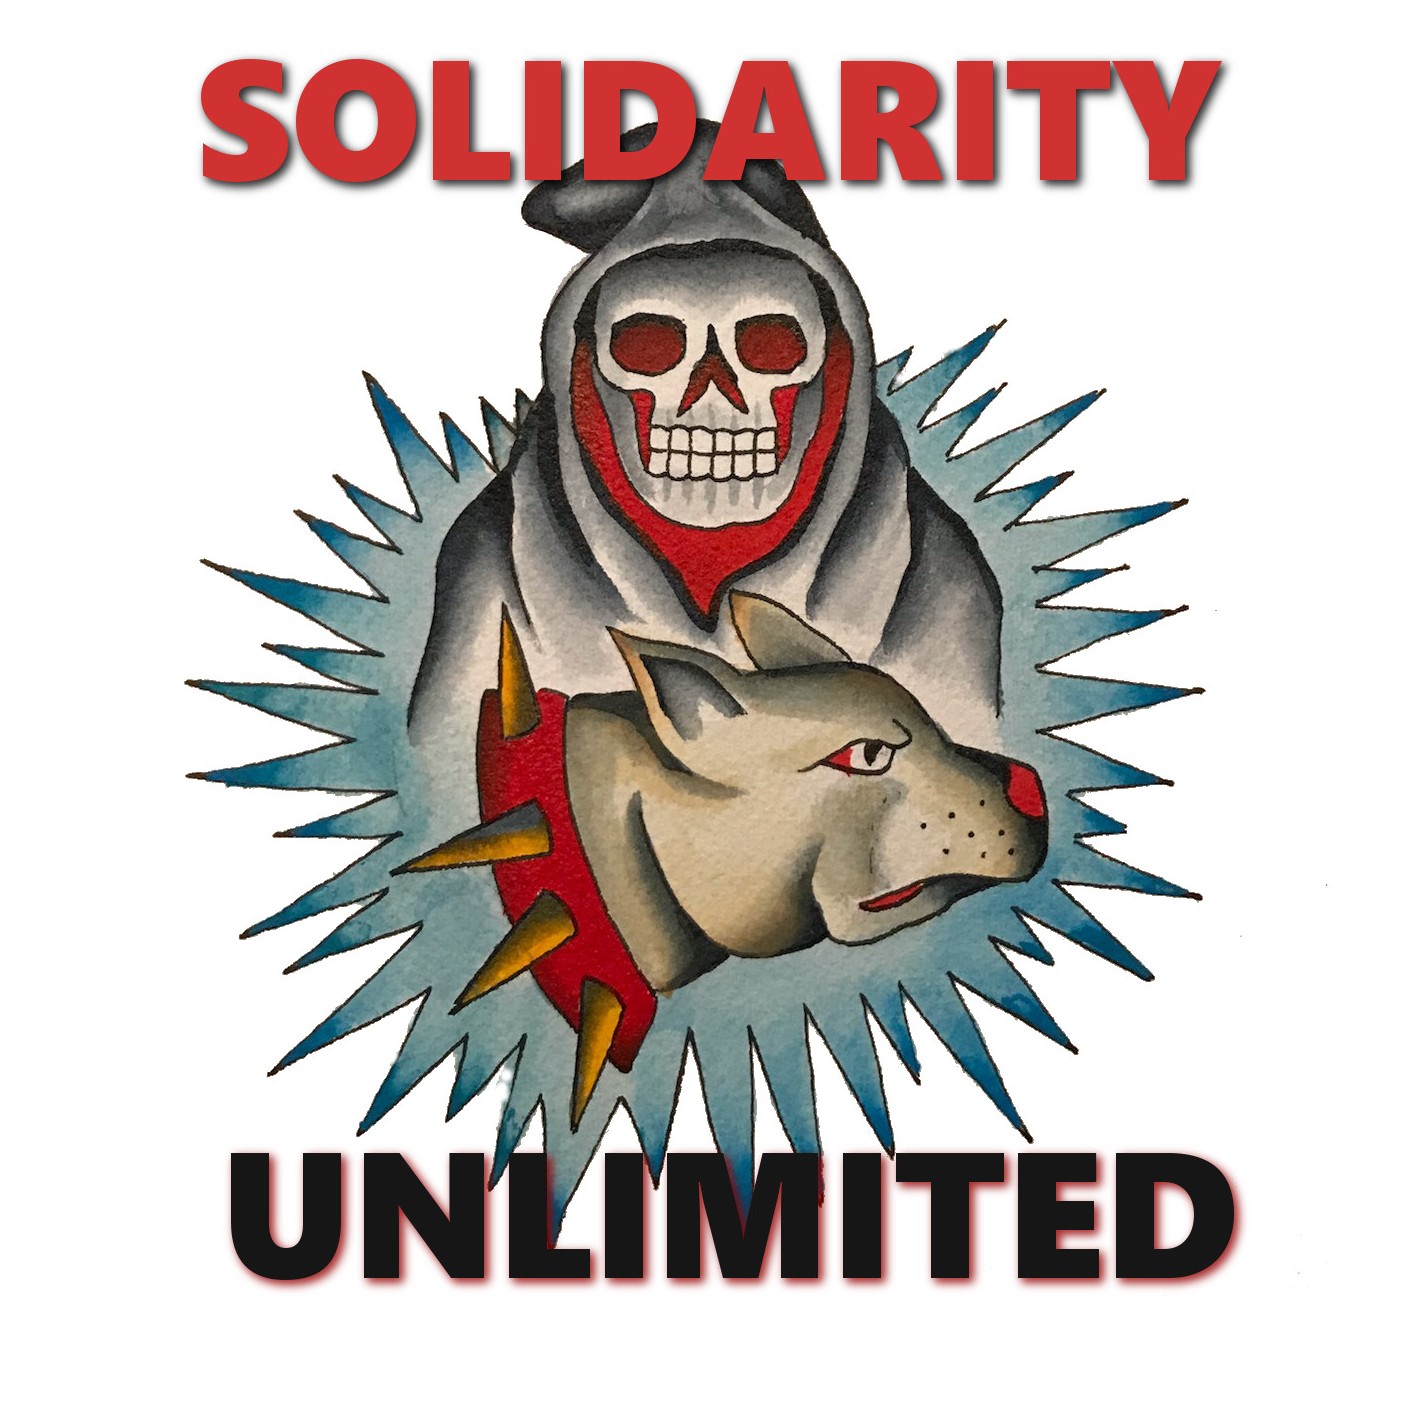 Solidarity Unlimited with Bowe and the Horse